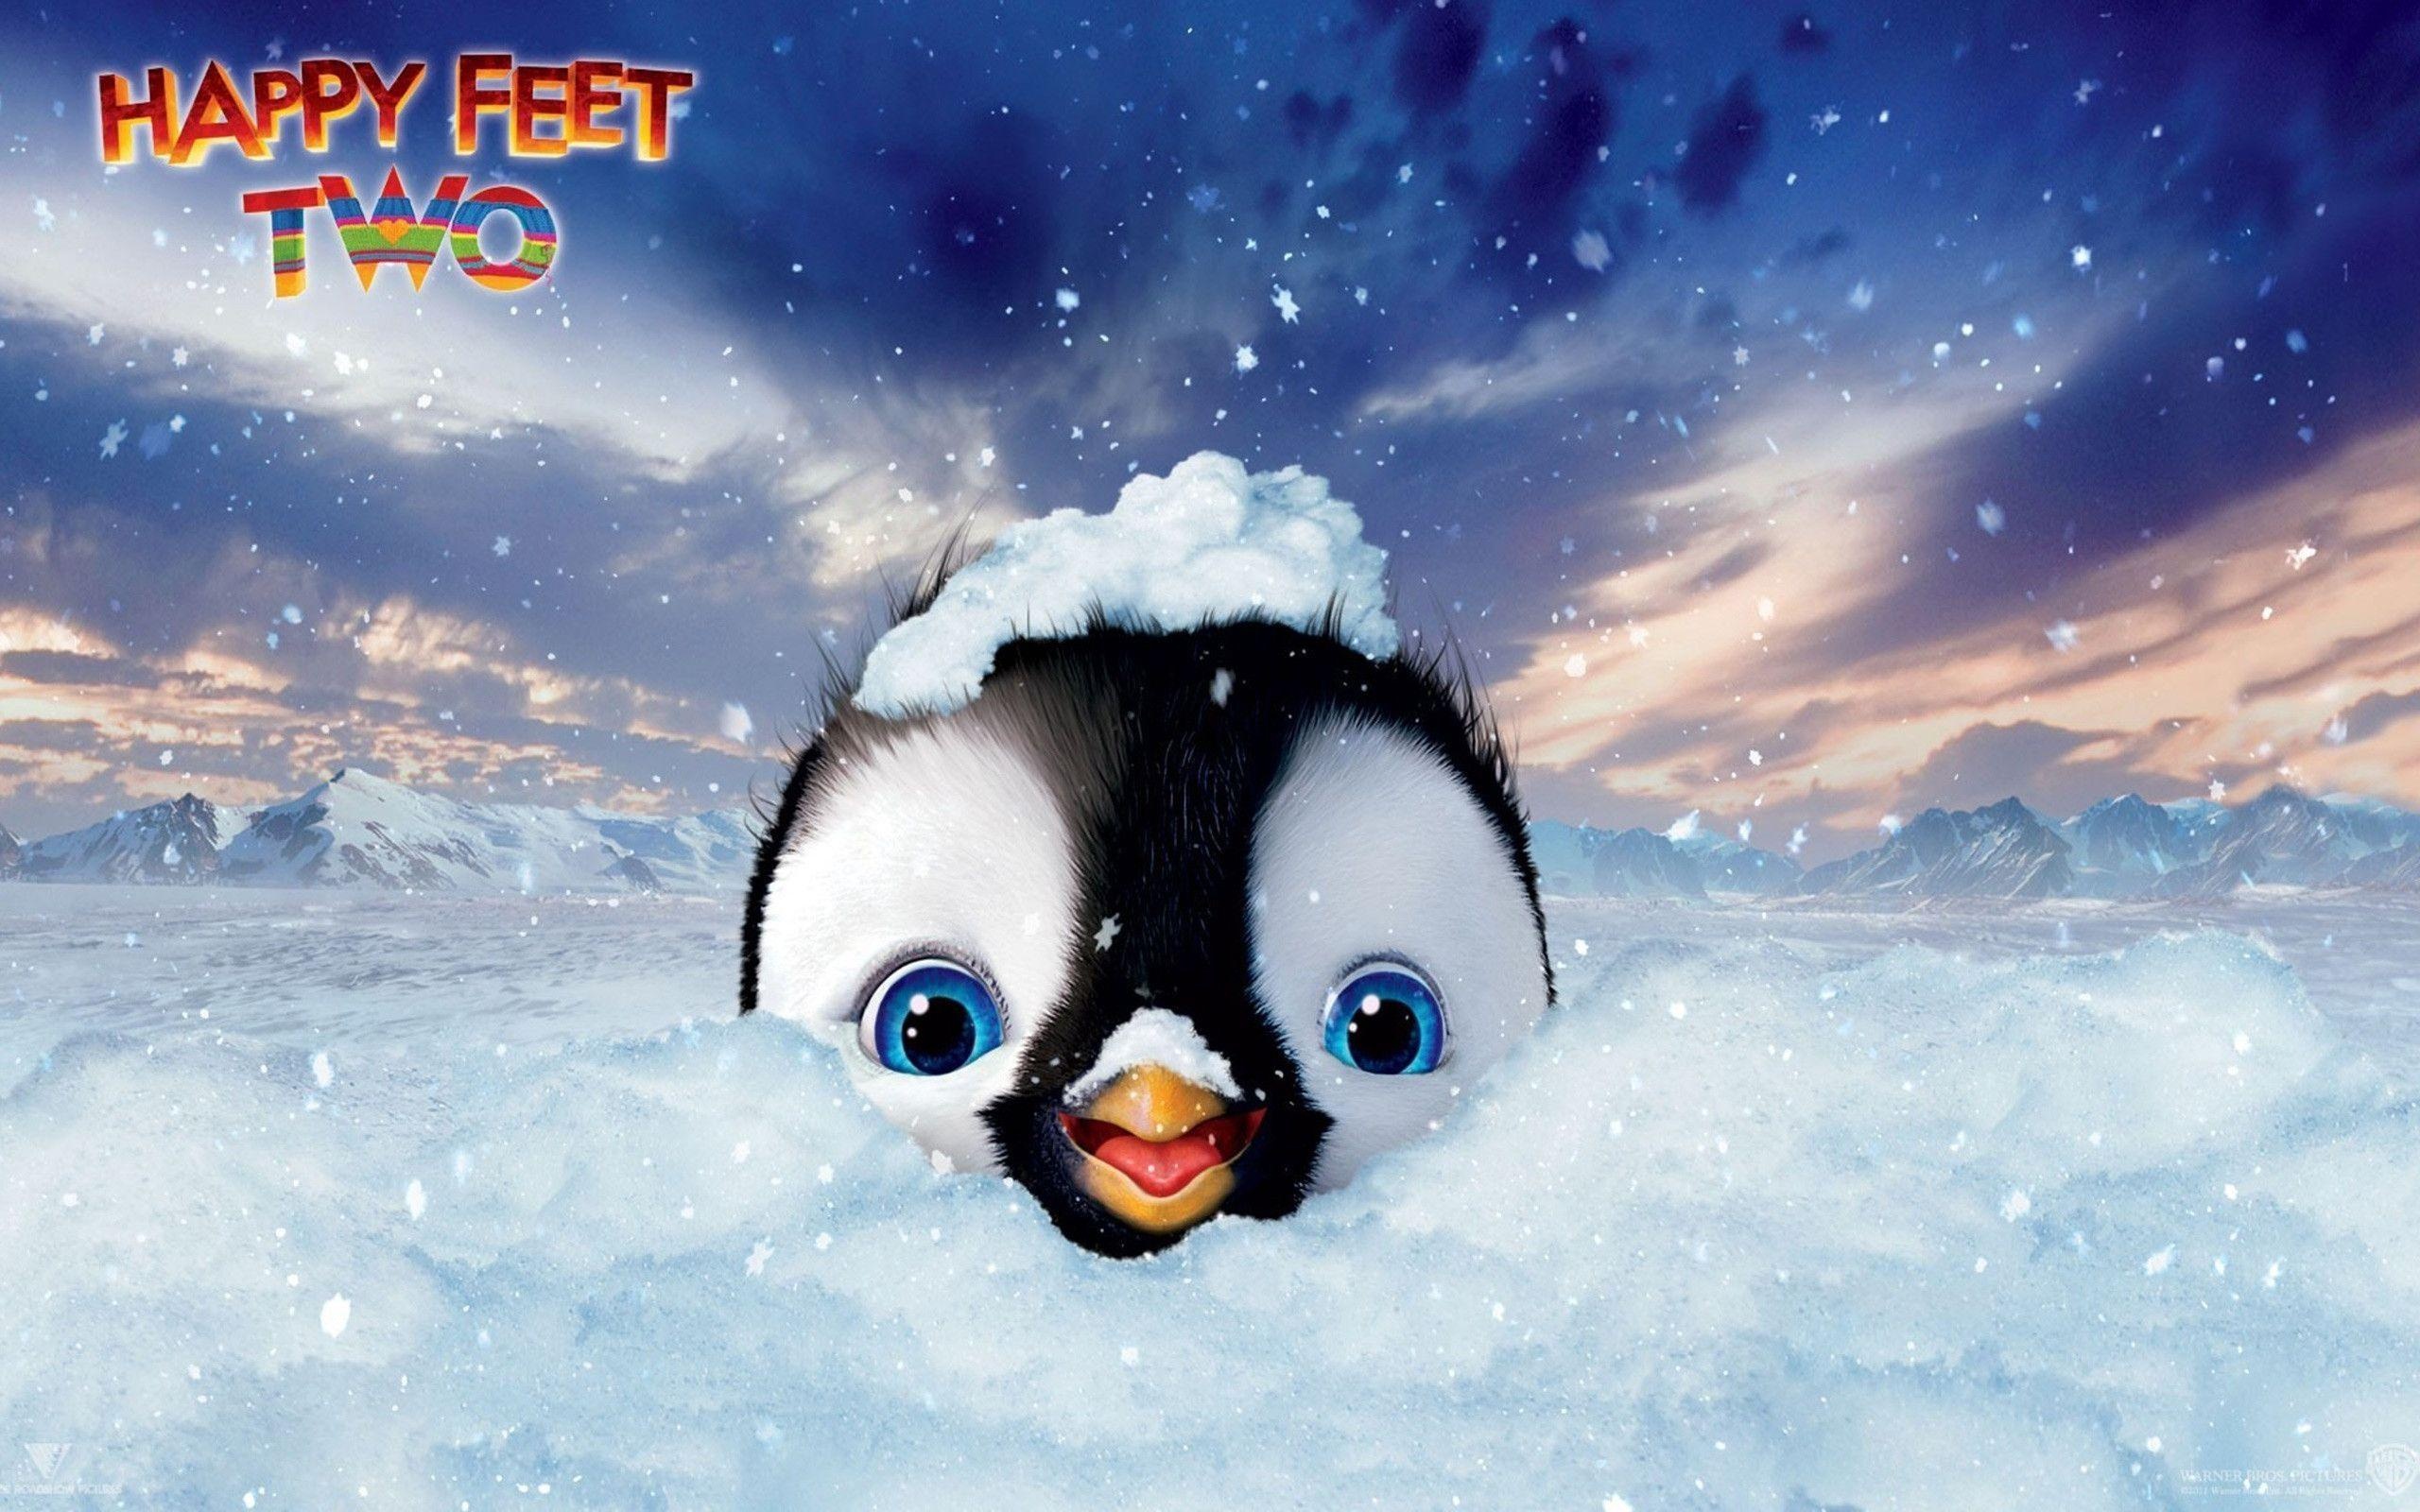 Happy Feet wallpapers, High definition quality, Vibrant colors, 2560x1600 HD Desktop